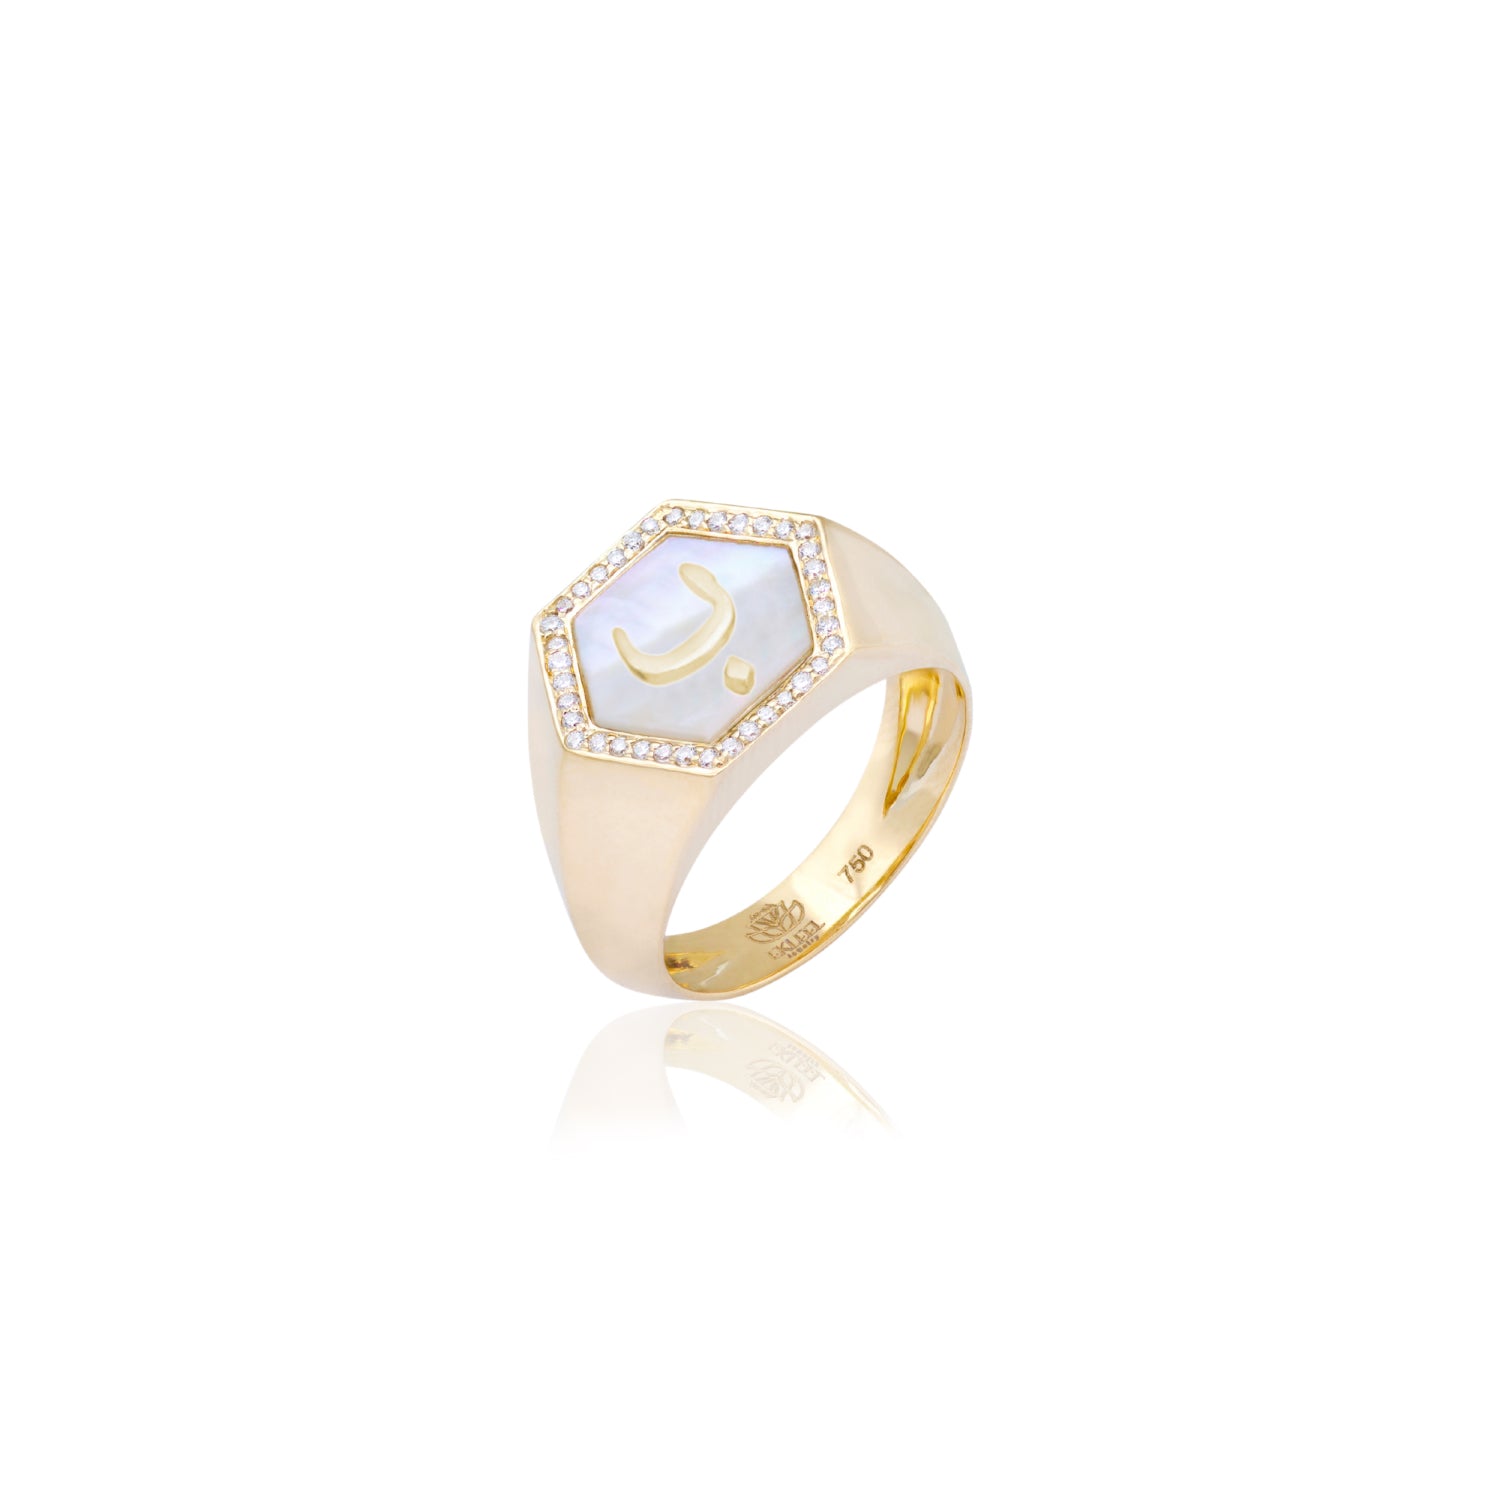 Qamoos 2.0 Letter ب White Mother of Pearl and Diamond Signet Ring in Yellow Gold